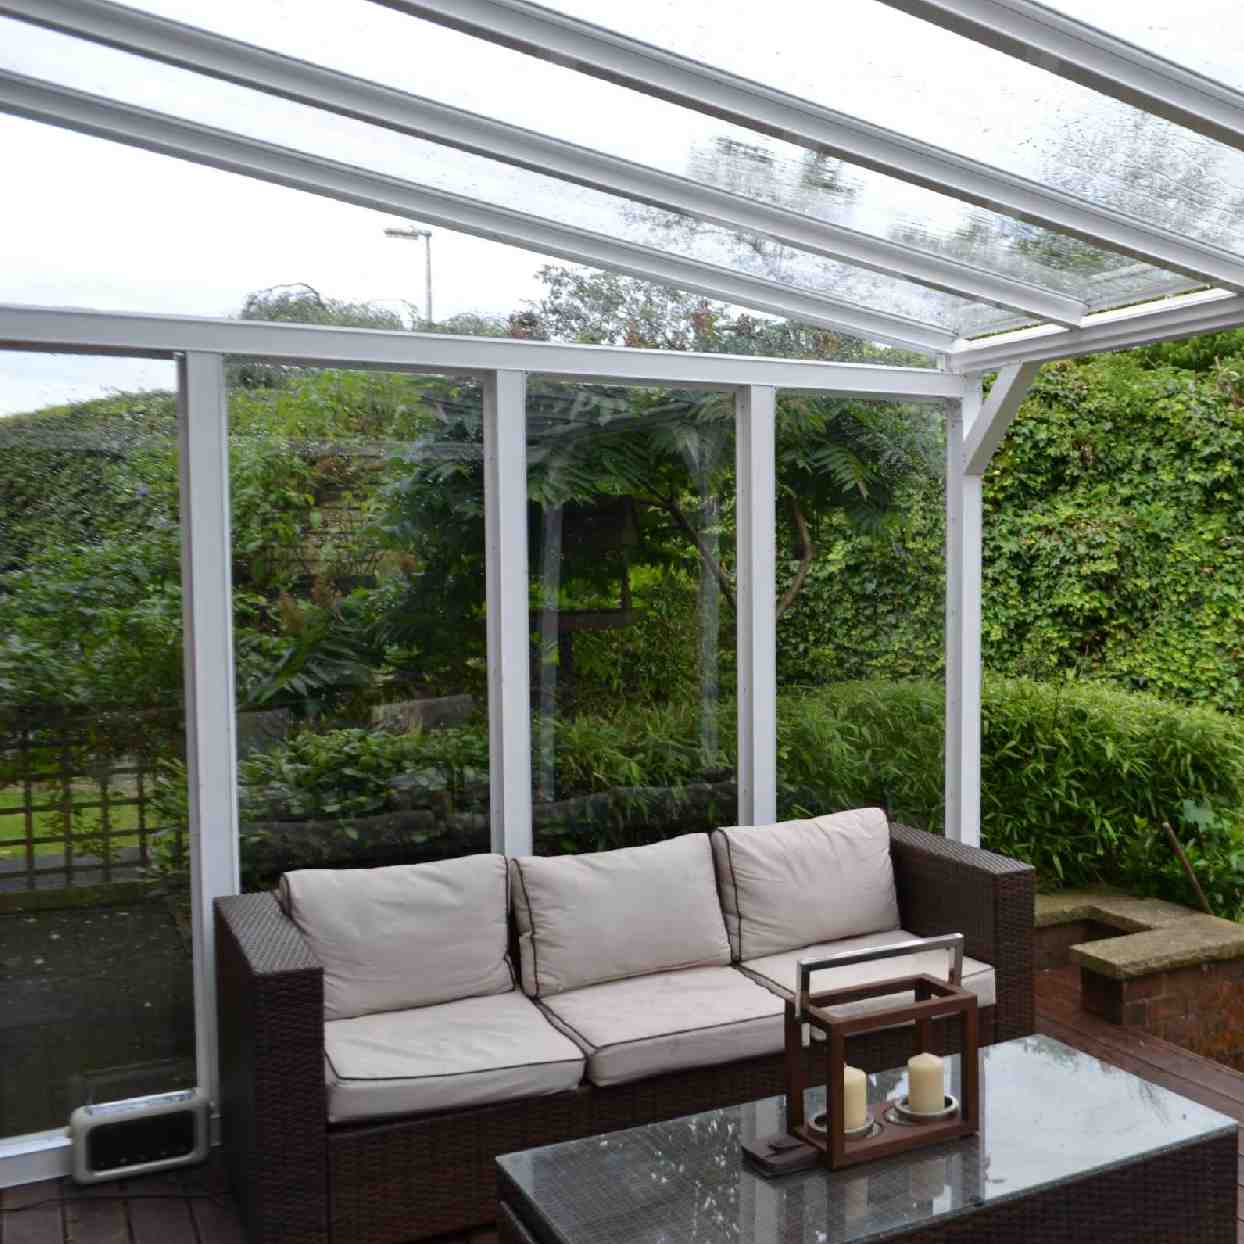 Buy Omega Verandah White with 16mm Polycarbonate Glazing - 7.8m (W) x 4.0m (P), (4) Supporting Posts online today